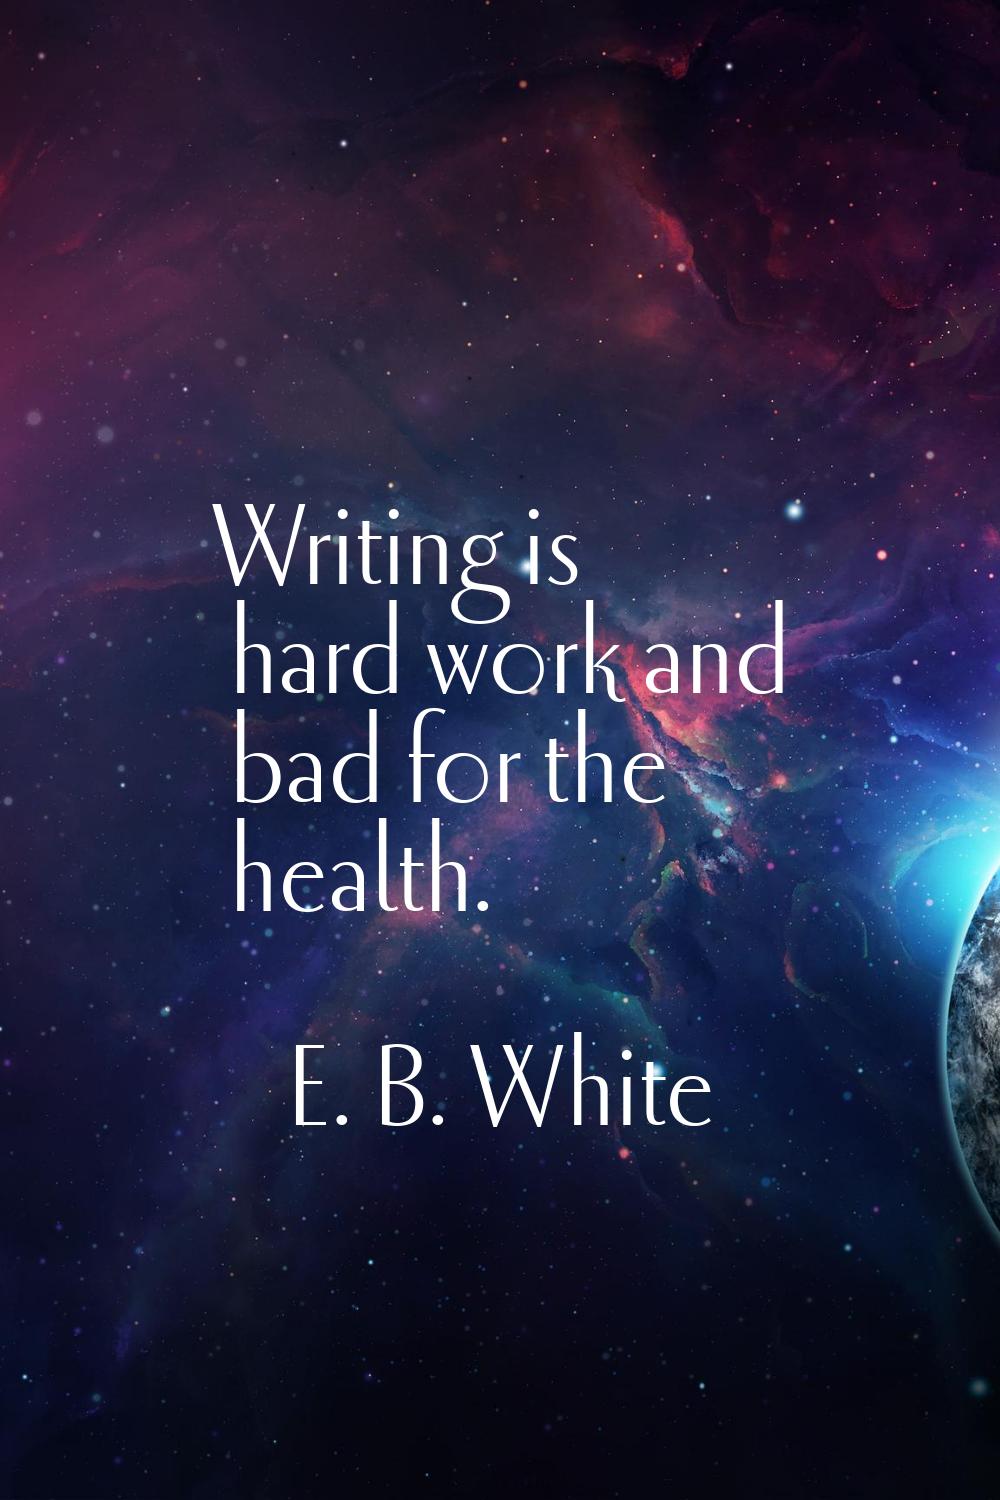 Writing is hard work and bad for the health.